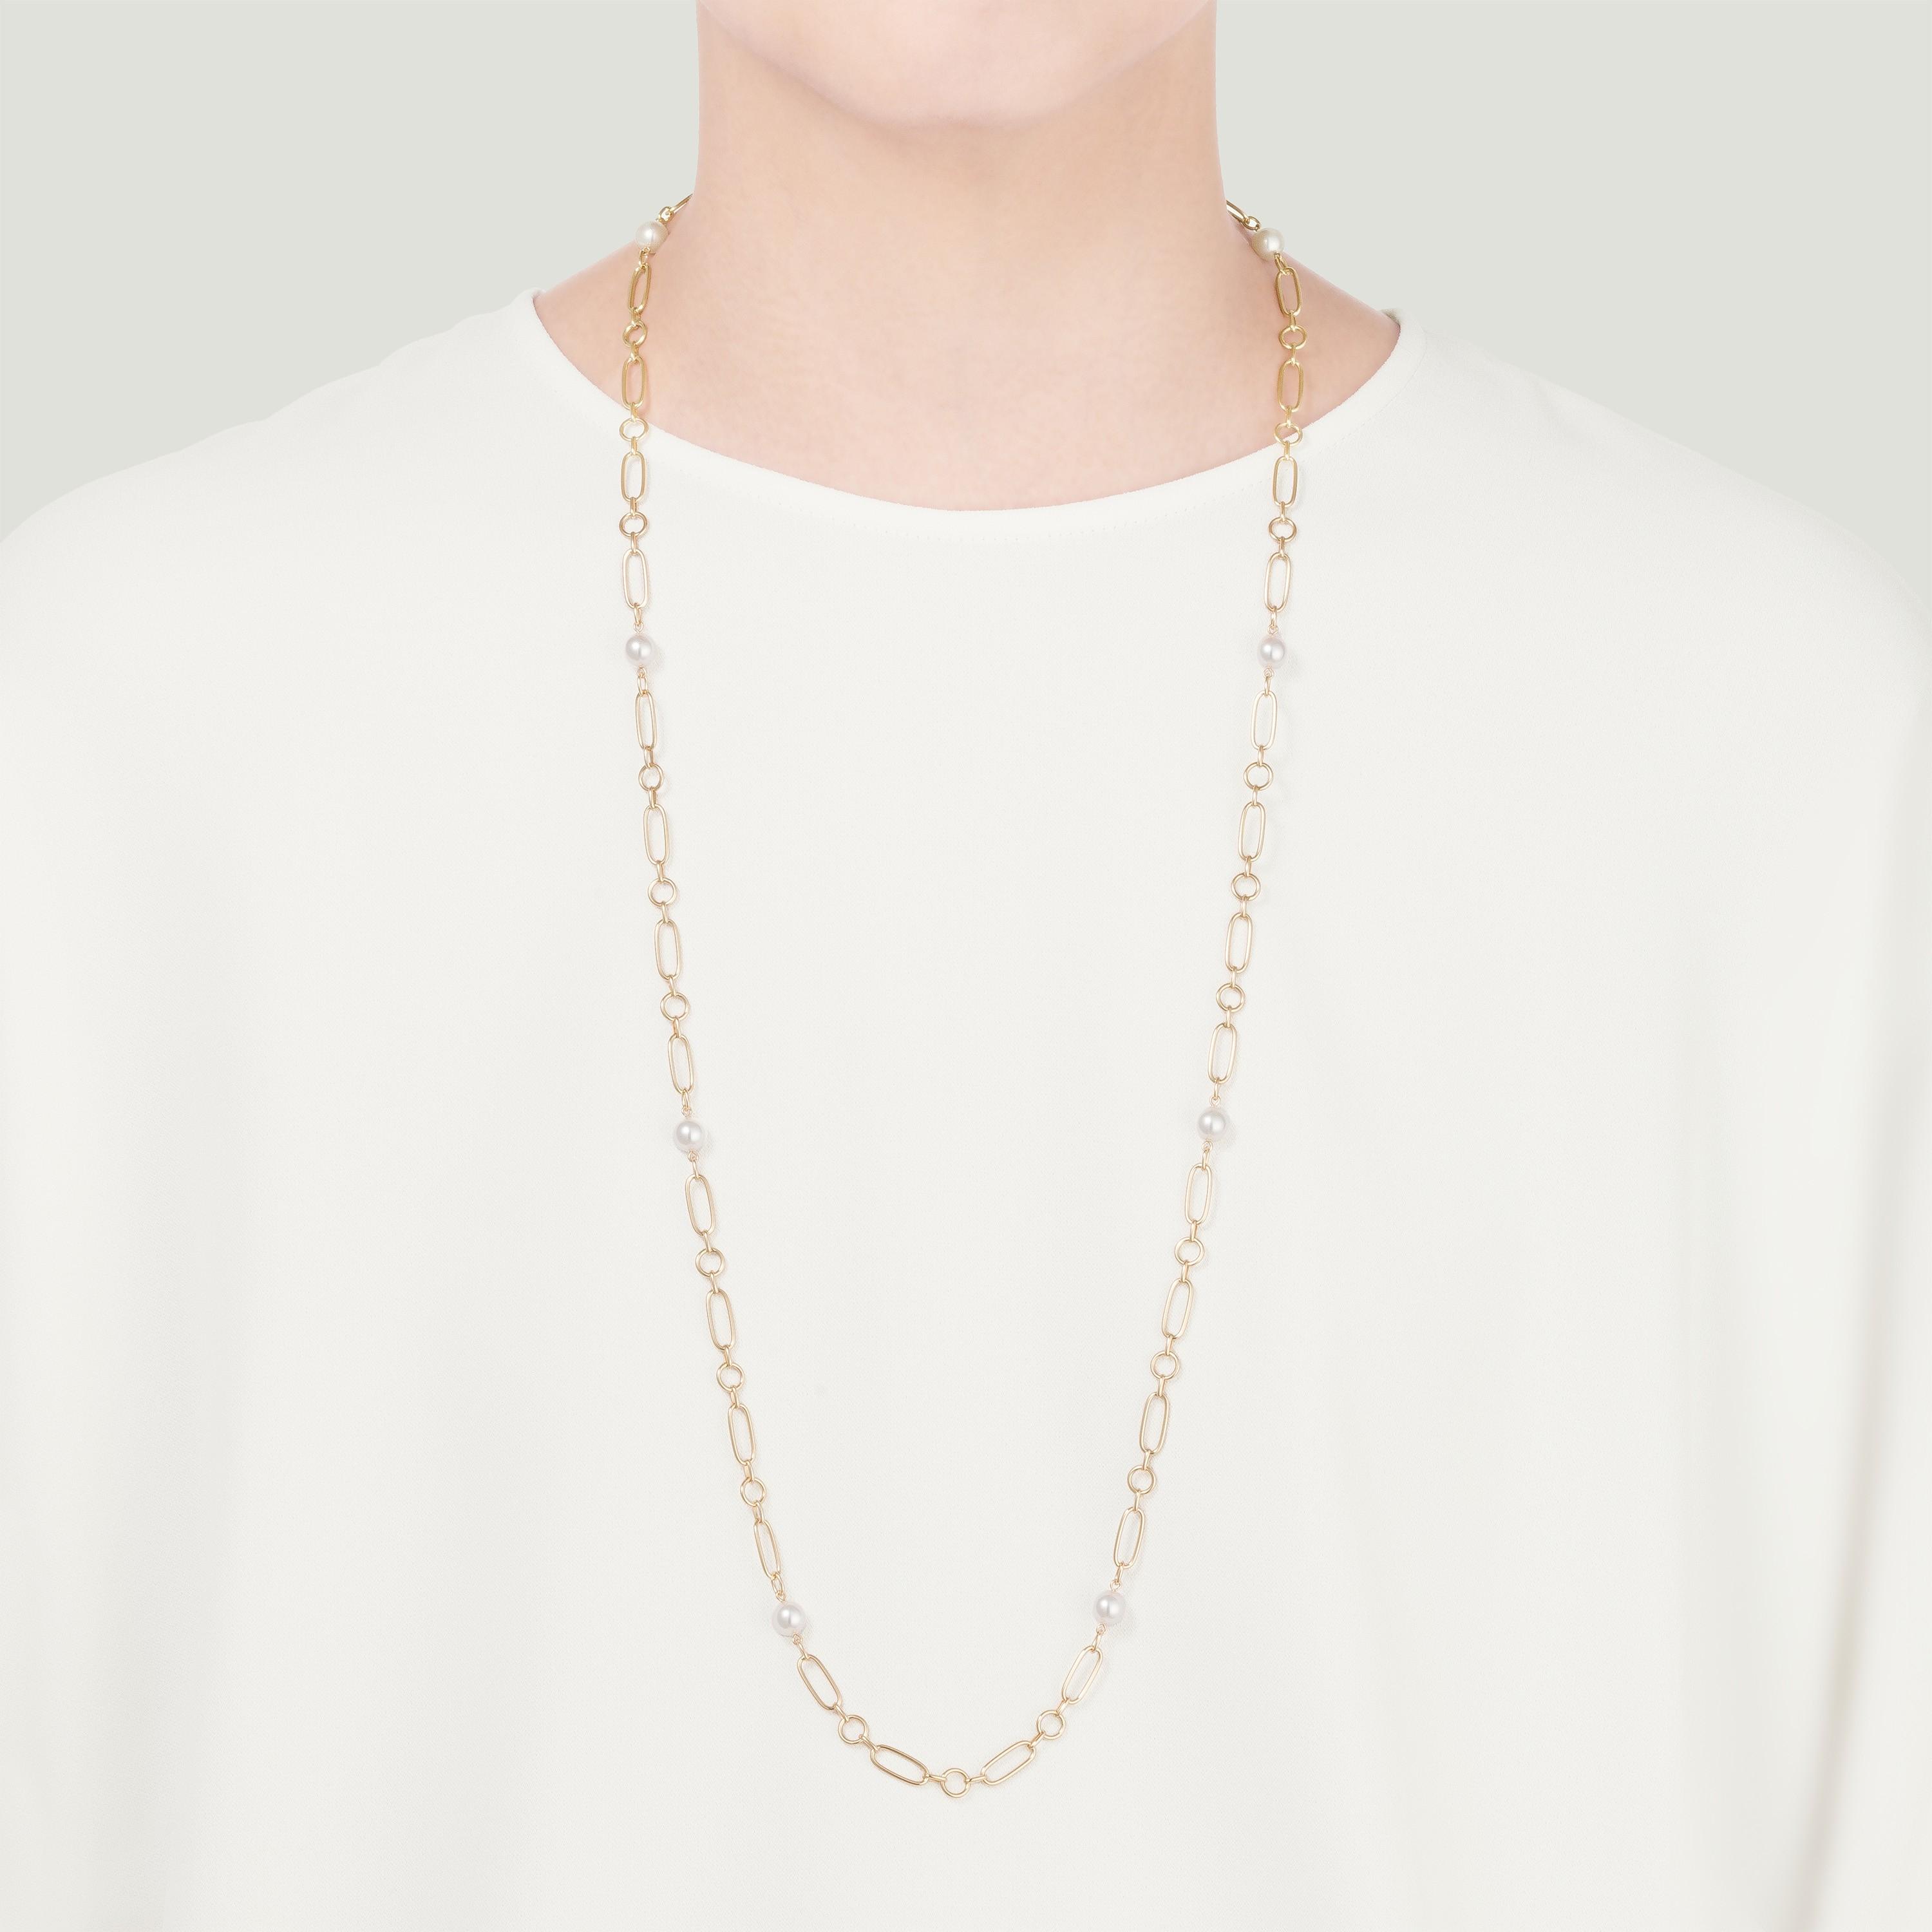 Mikimoto M Code 6.5mm A Akoya Cultured Pearl Link Station Necklace in Yellow Gold, 32.5 inches 1